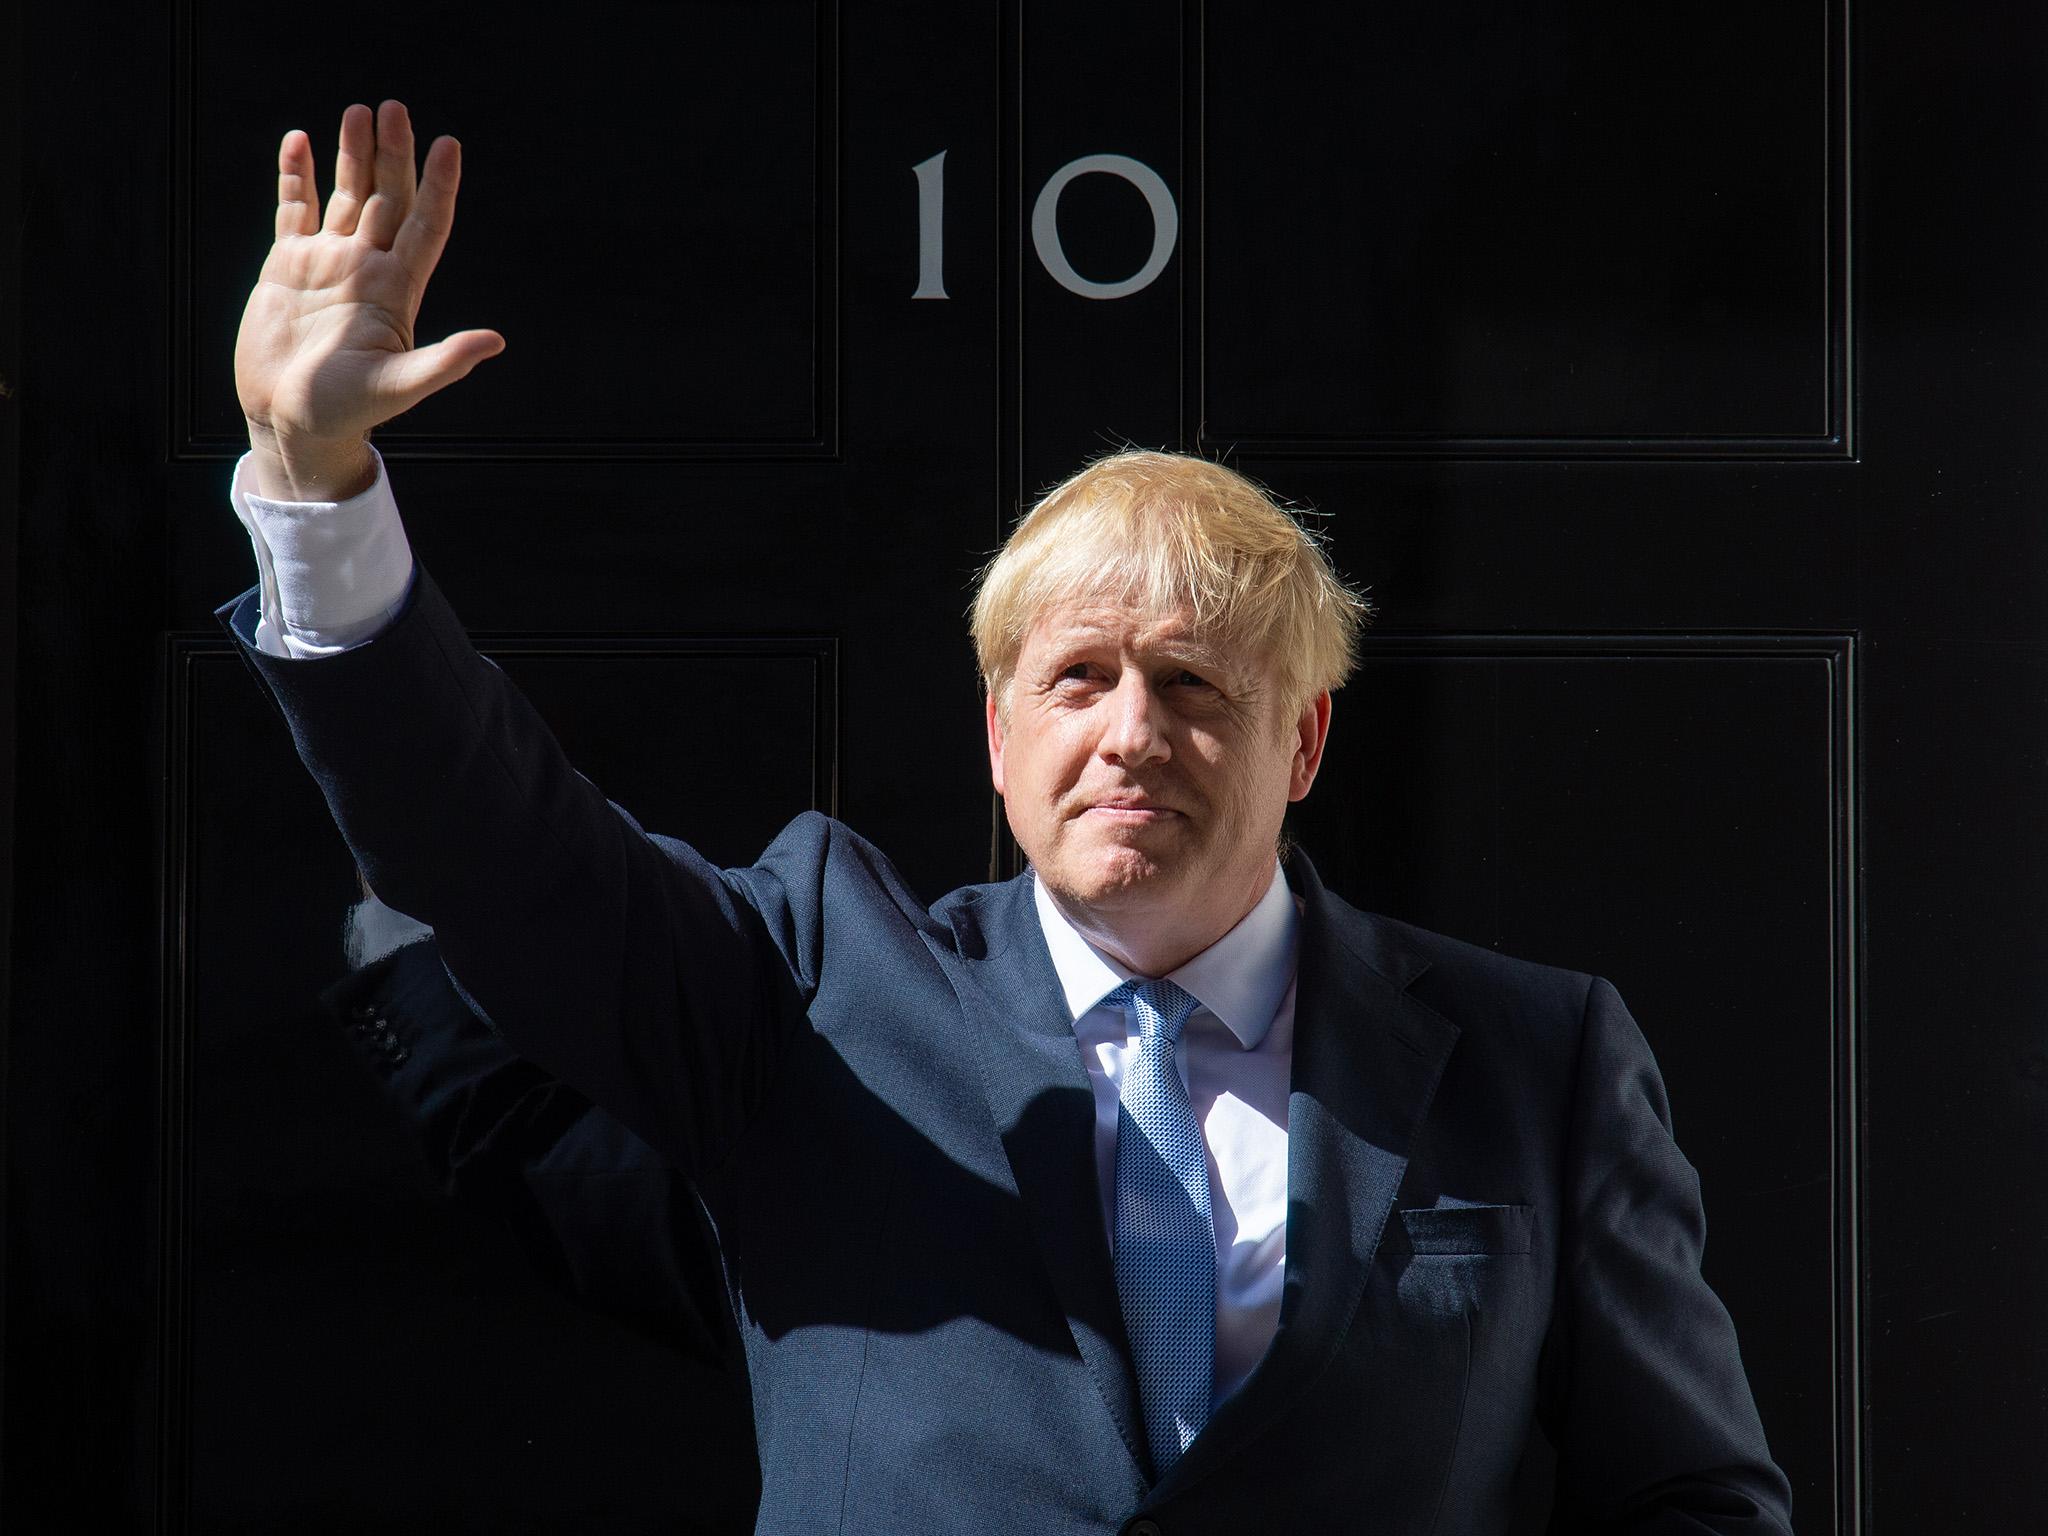 Boris Johnson faces Supreme Court bid to make him stand trial for 'lying and misleading' in Brexit campaign